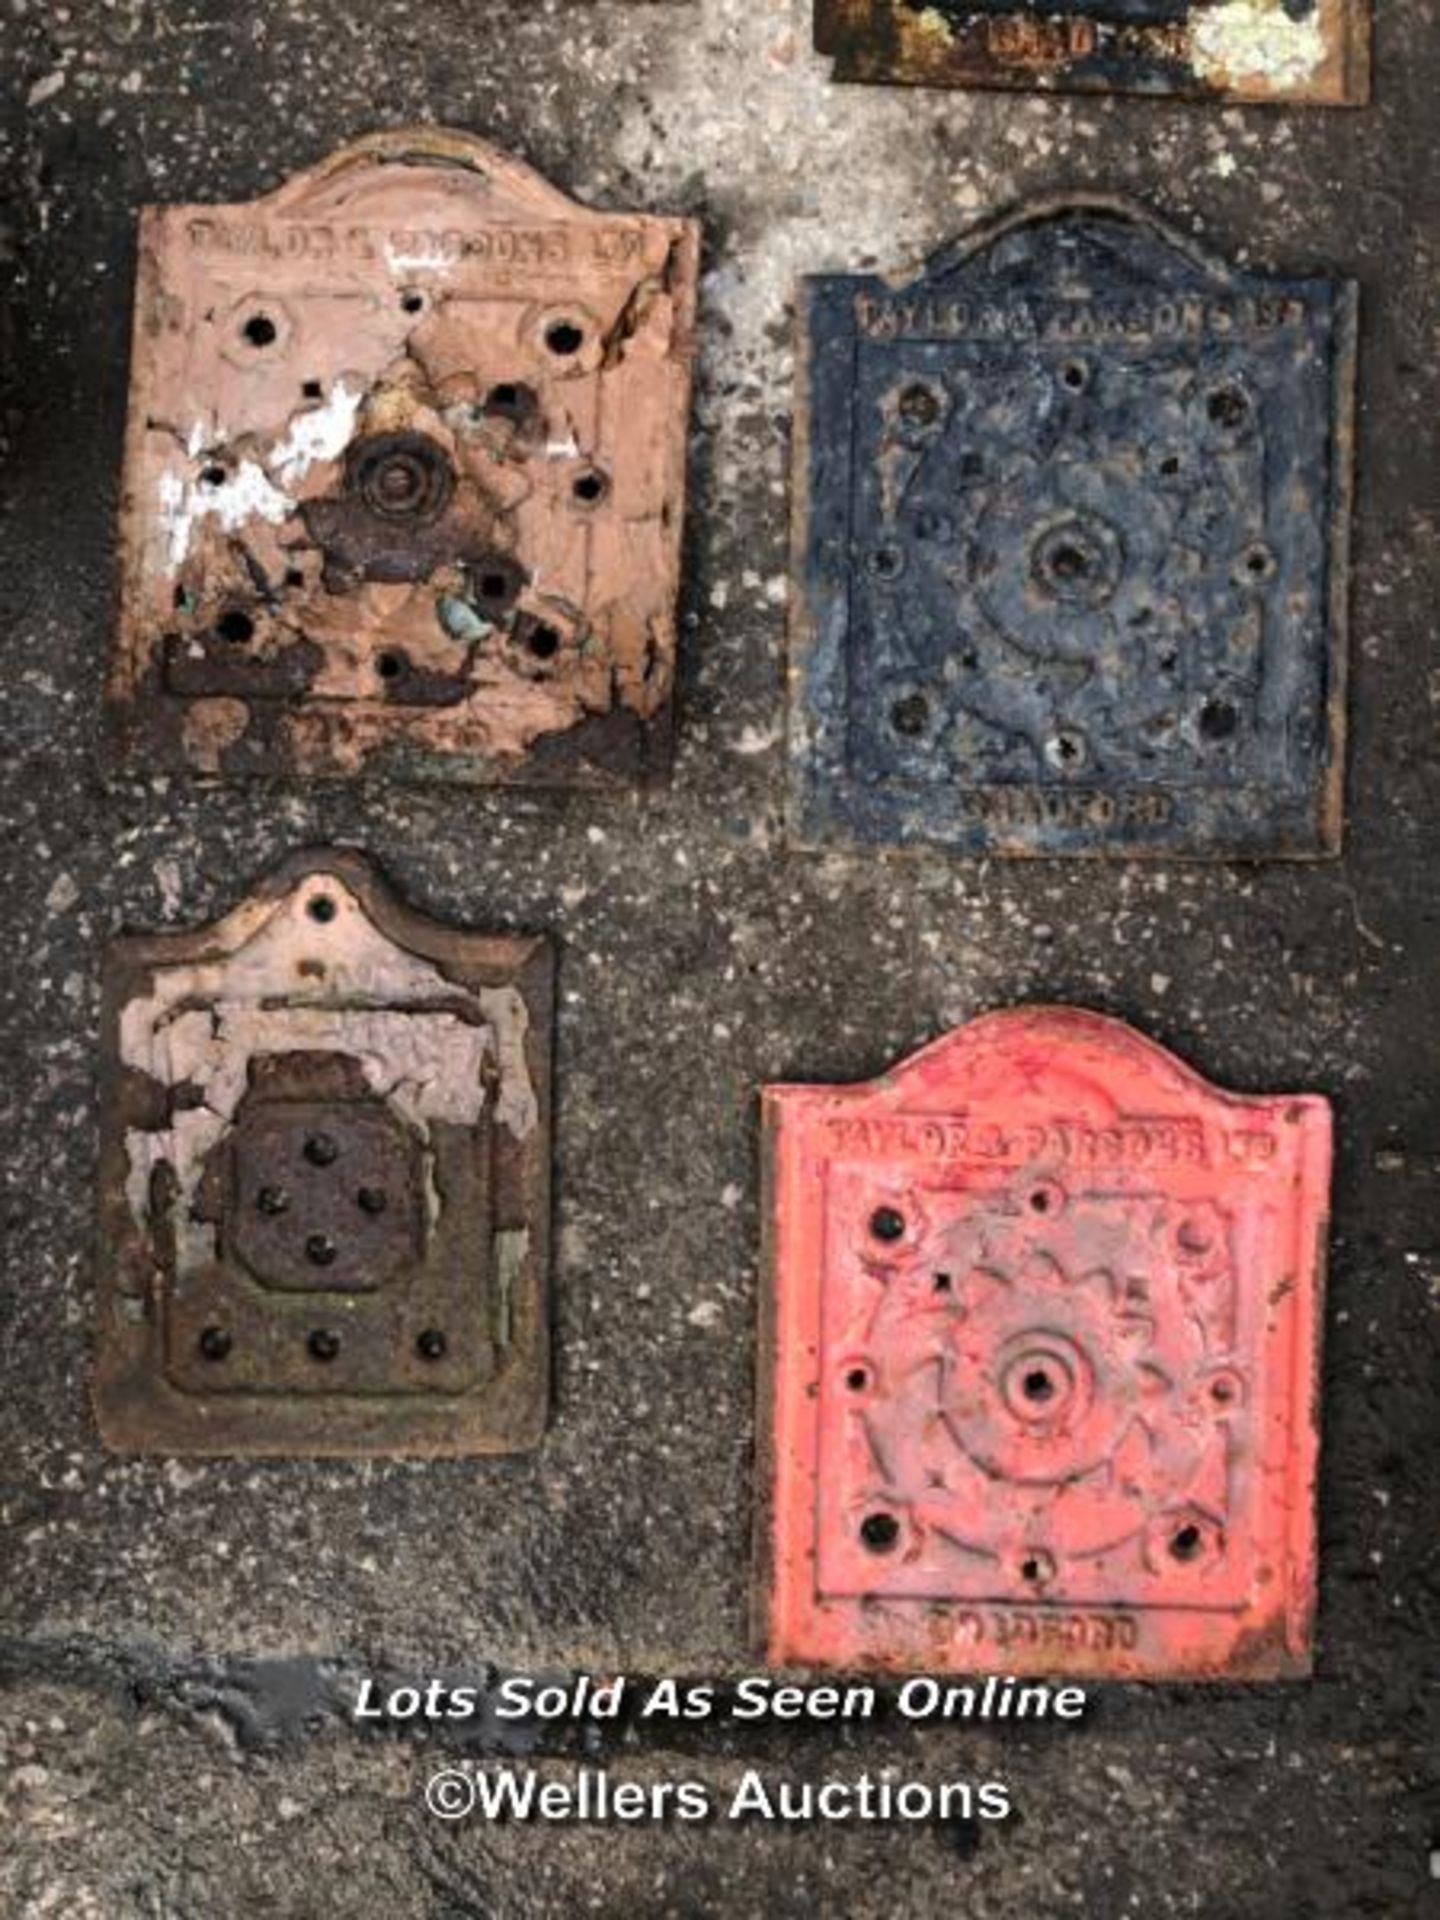 TEN RARE CAST IRON VENTILATION COVERS, WITH SOME FLORAL DECORATION - Image 4 of 7